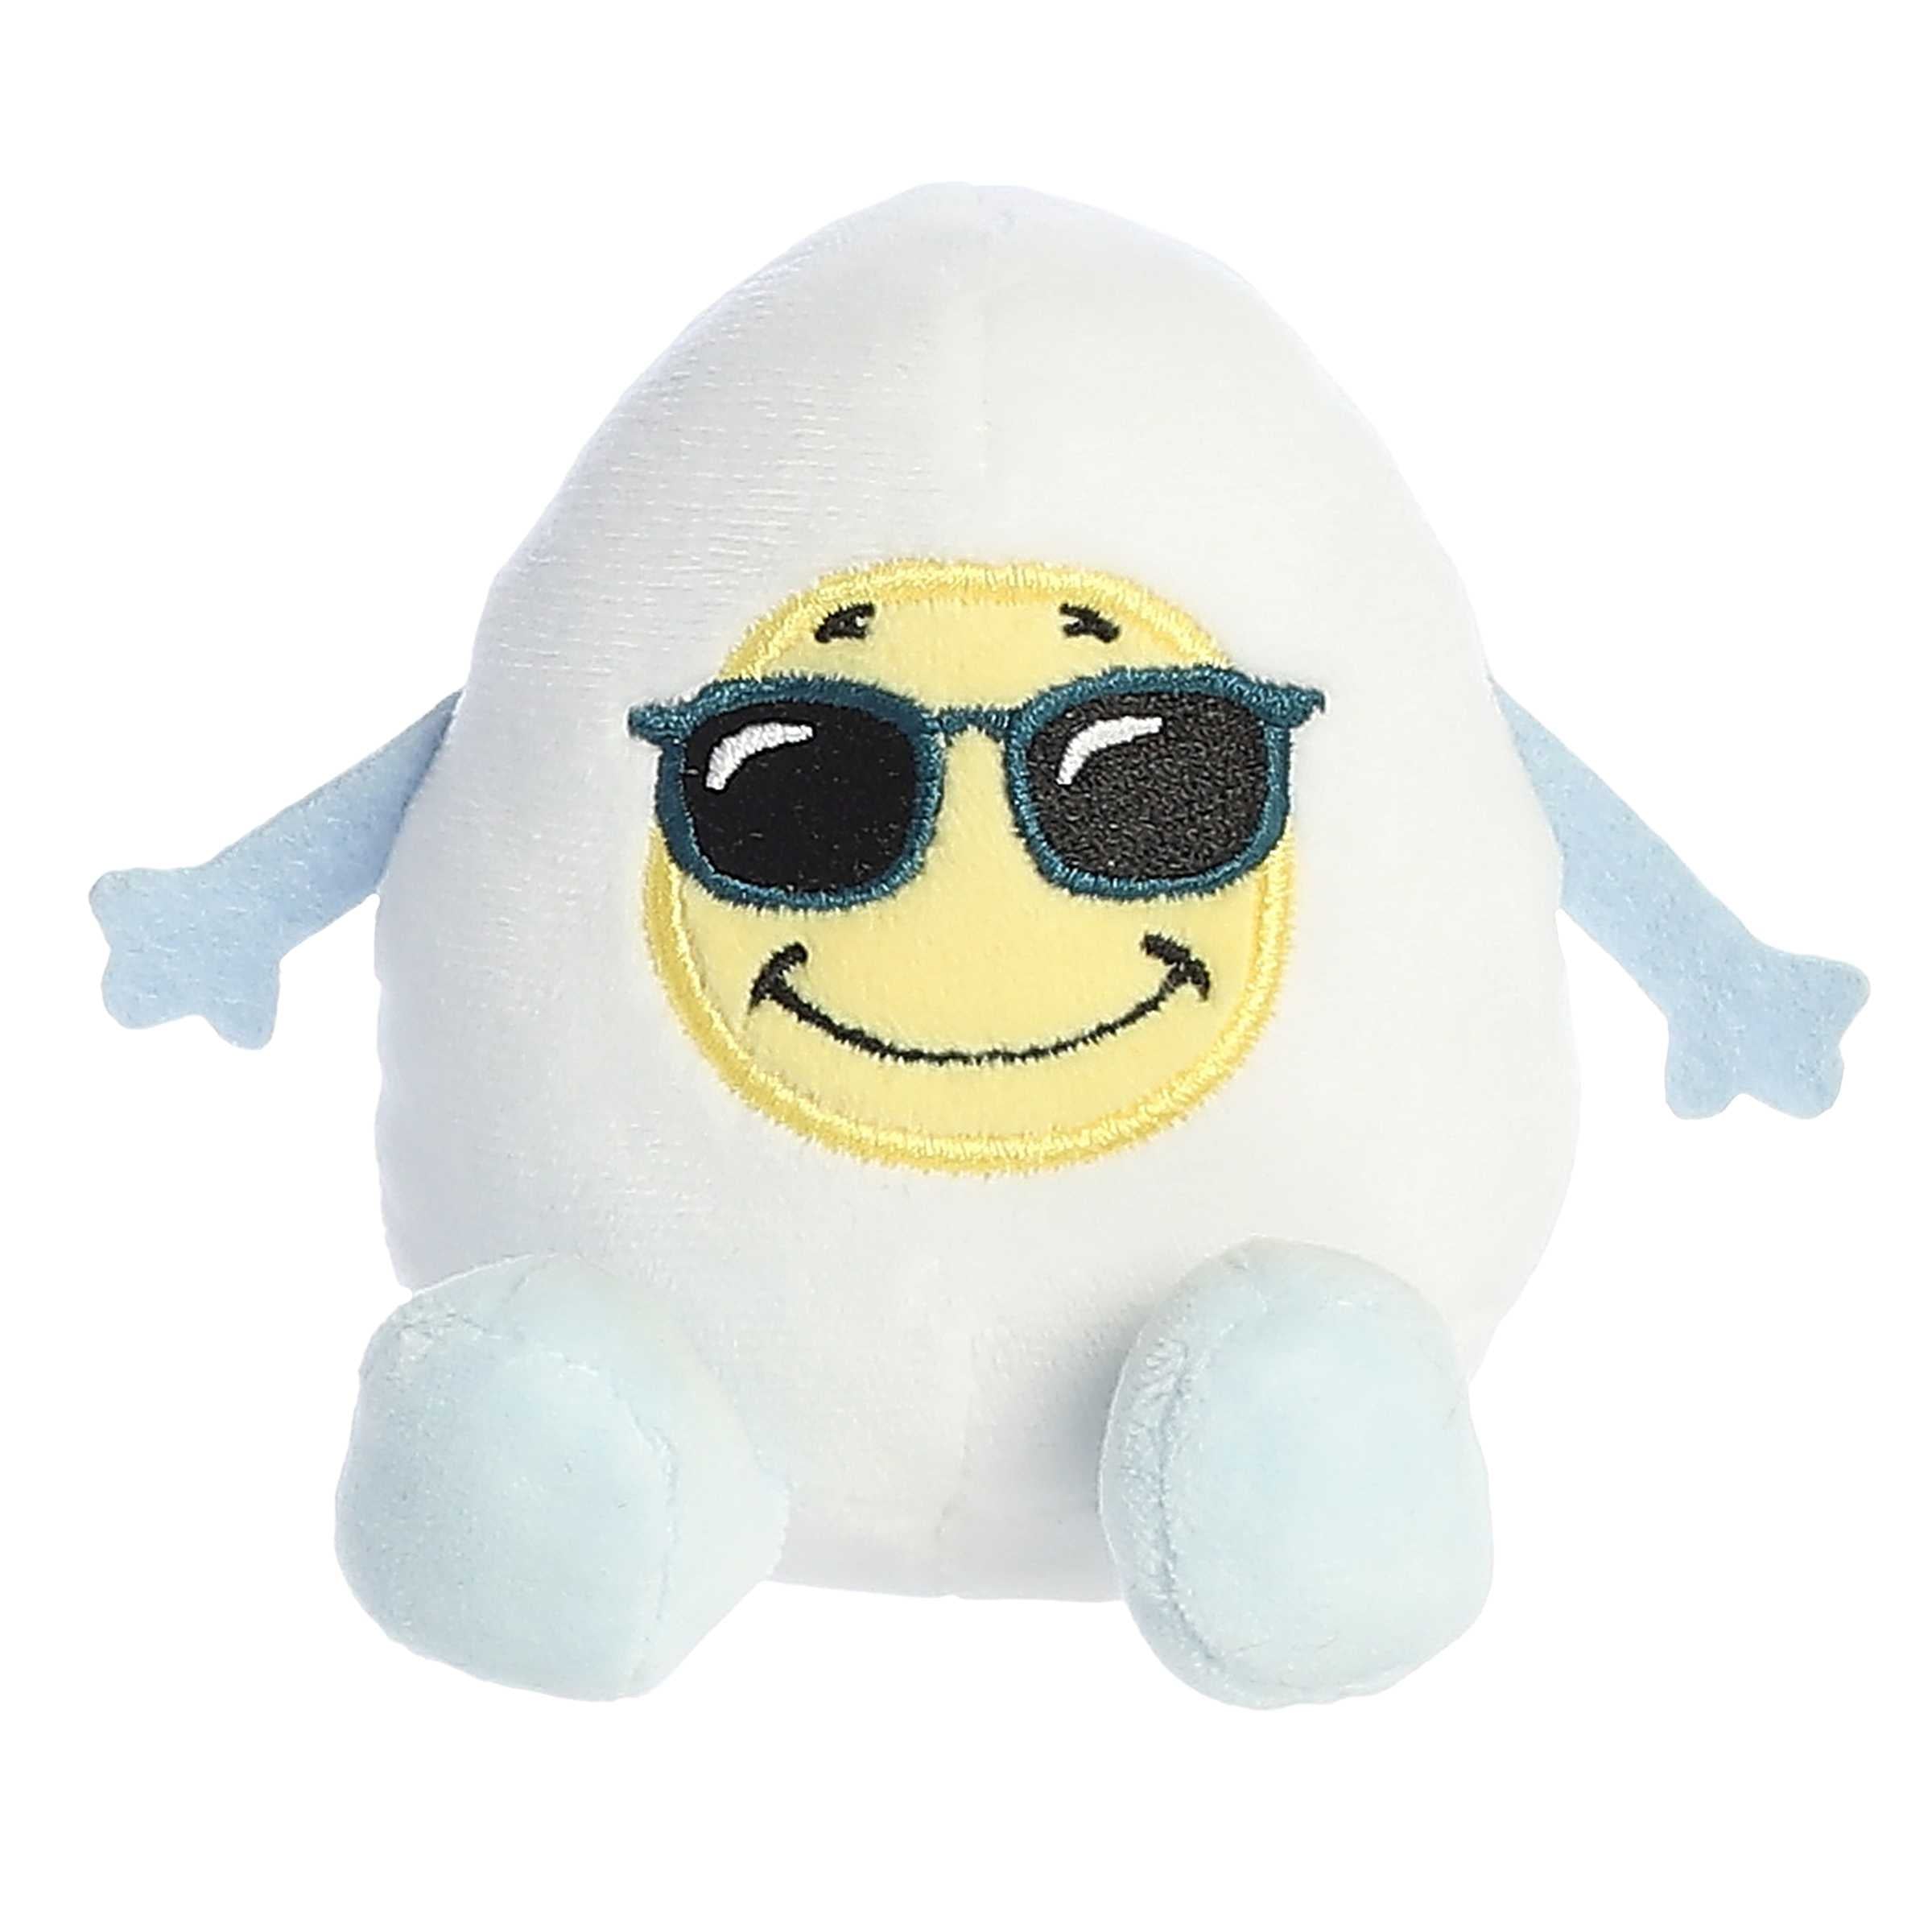 Cute egg plushie with a white and blue body, yolk face wearing glasses, and a "Sunny Side Up" expression written on its back